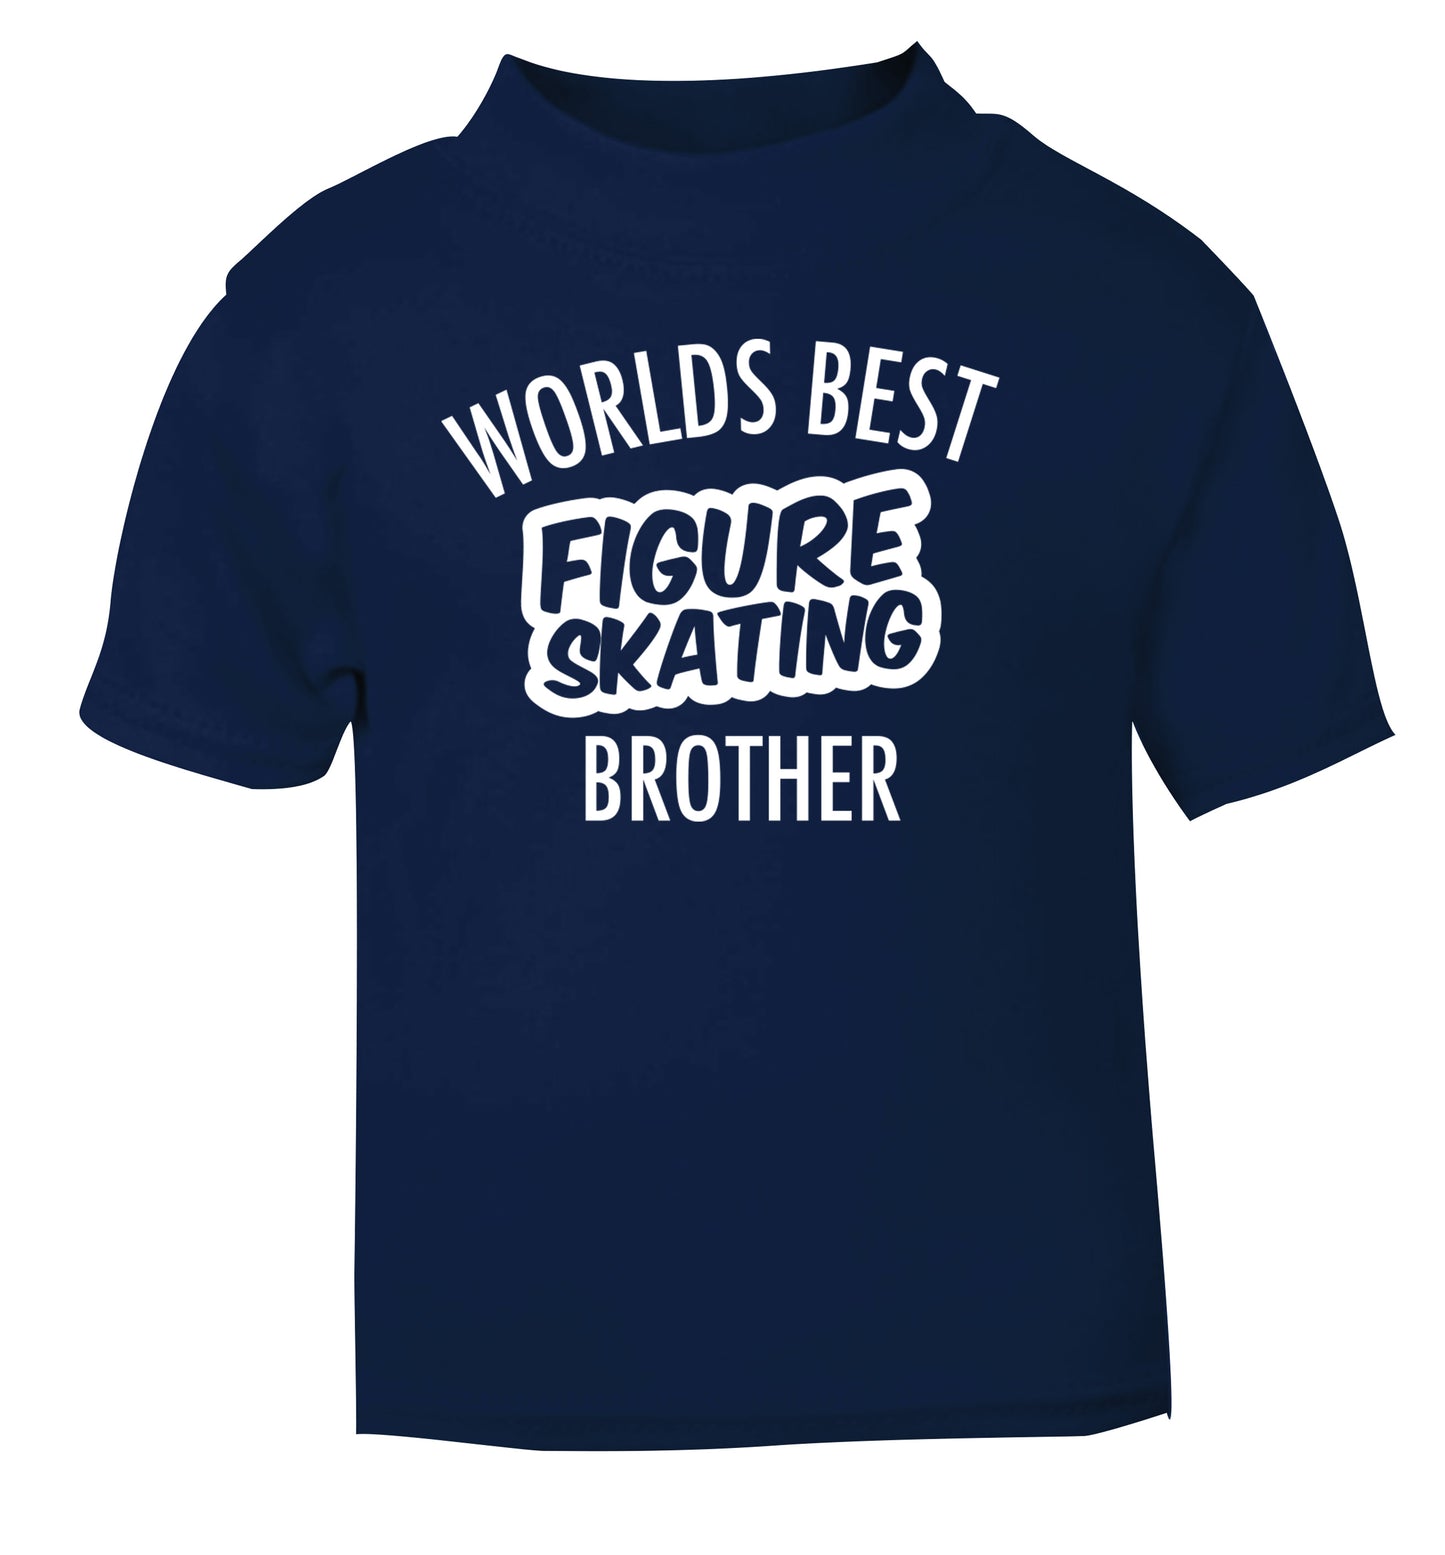 Worlds best figure skating brother navy Baby Toddler Tshirt 2 Years